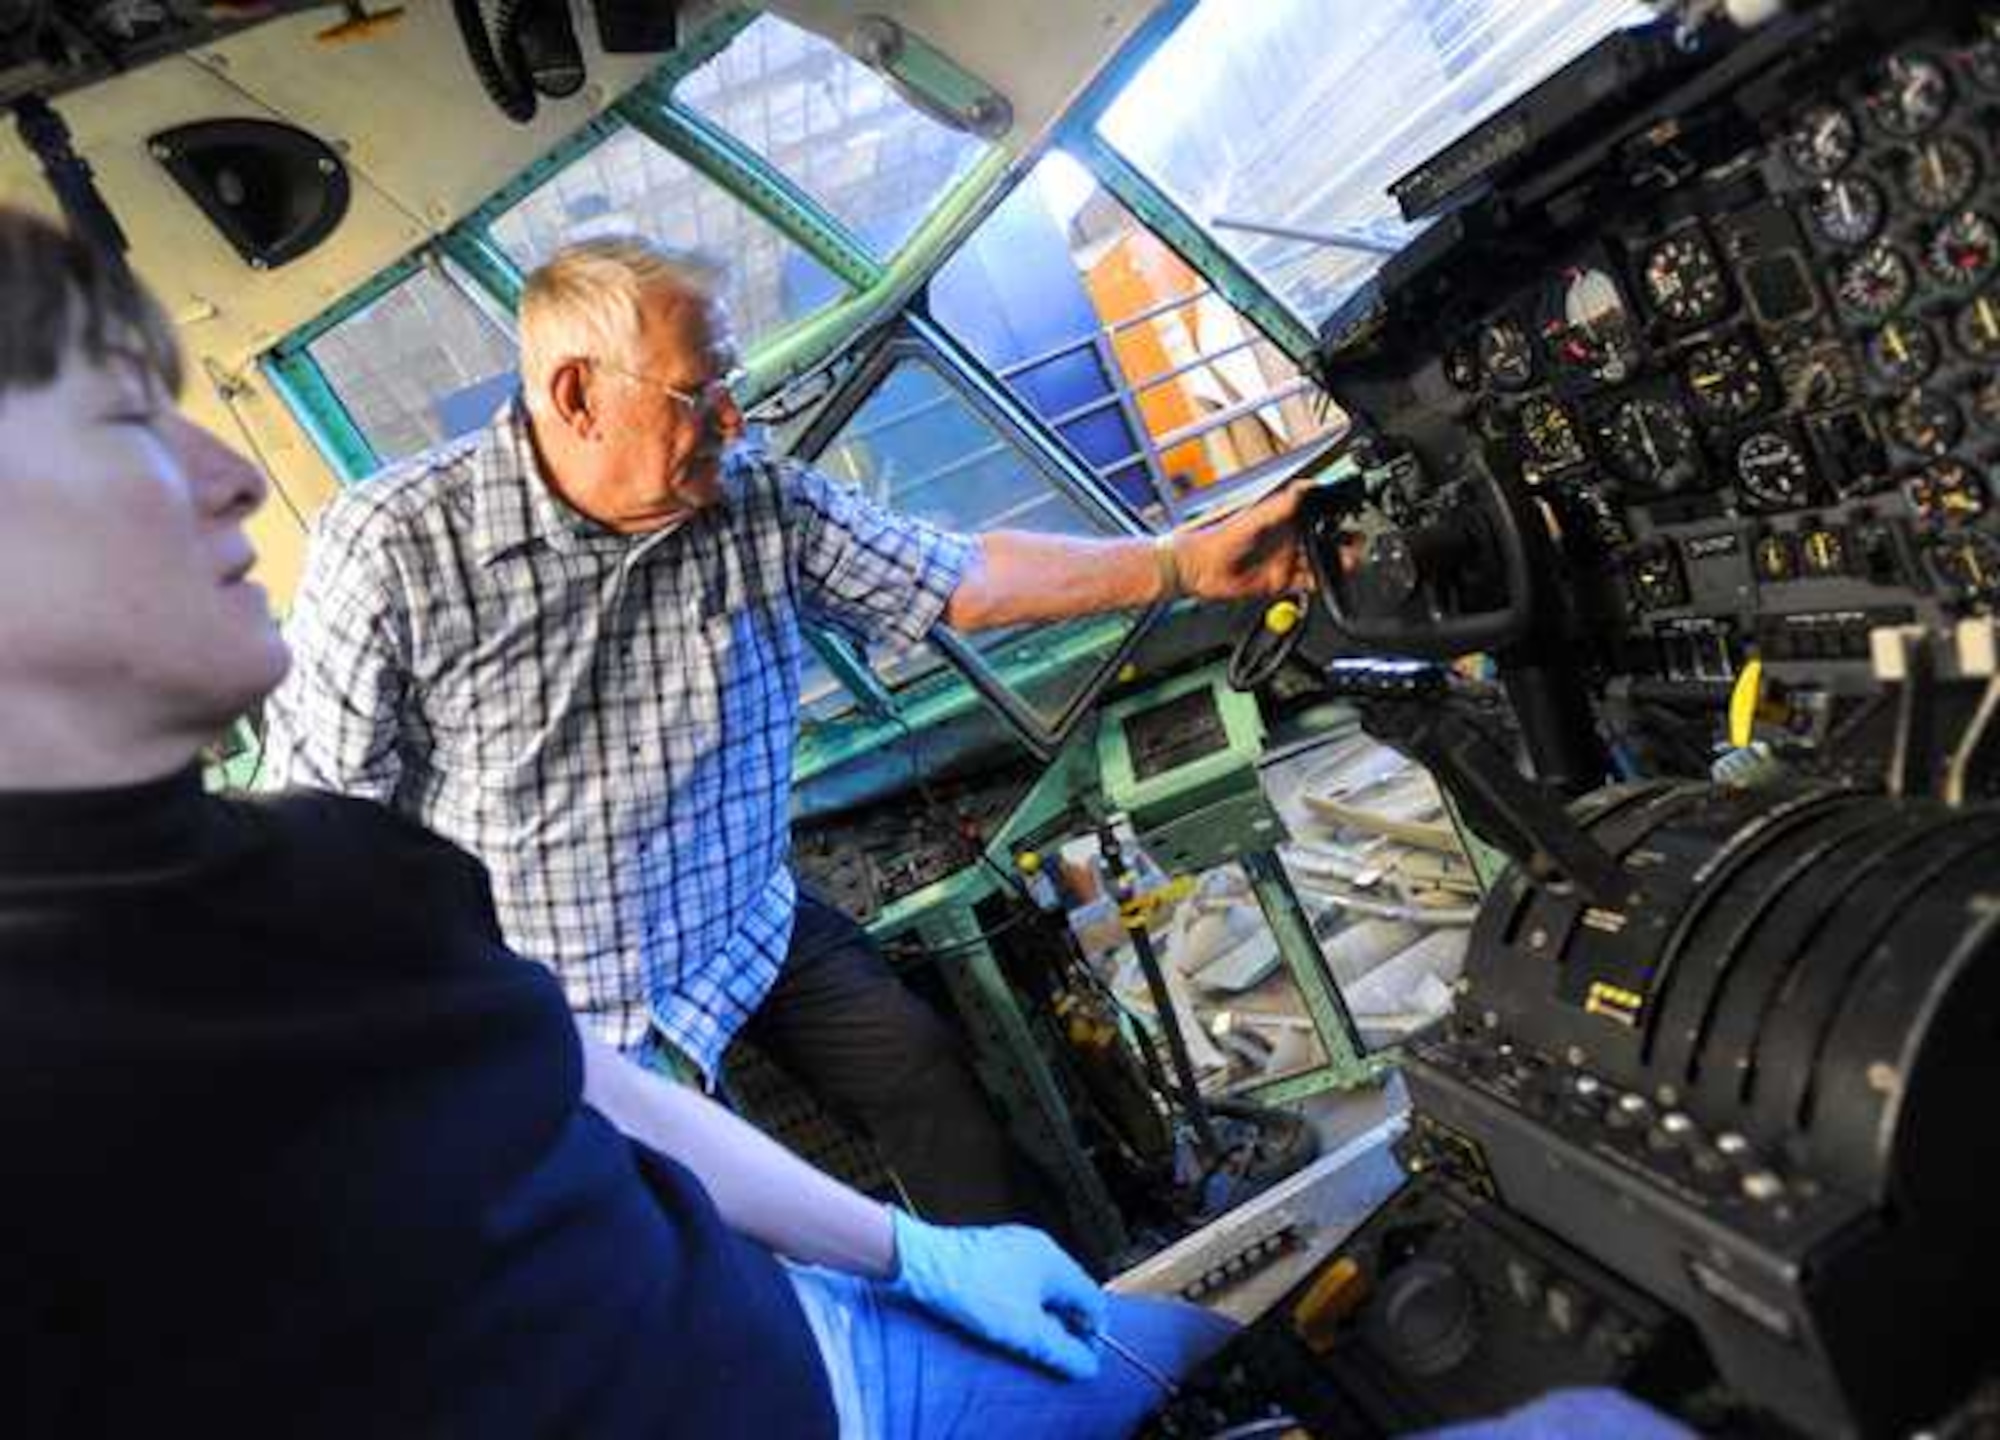 McChord Air Museum volunteers Jim Bernethy and Sherri Jenne look for a control inside the cockpit of a Lockheed C-130 Hercules that is being restored at the restoration hangar on March 25 at McChord Field, Joint Base Lewis-McChord, Wash. (U.S. Air Force photo/Ingrid Barrentine)